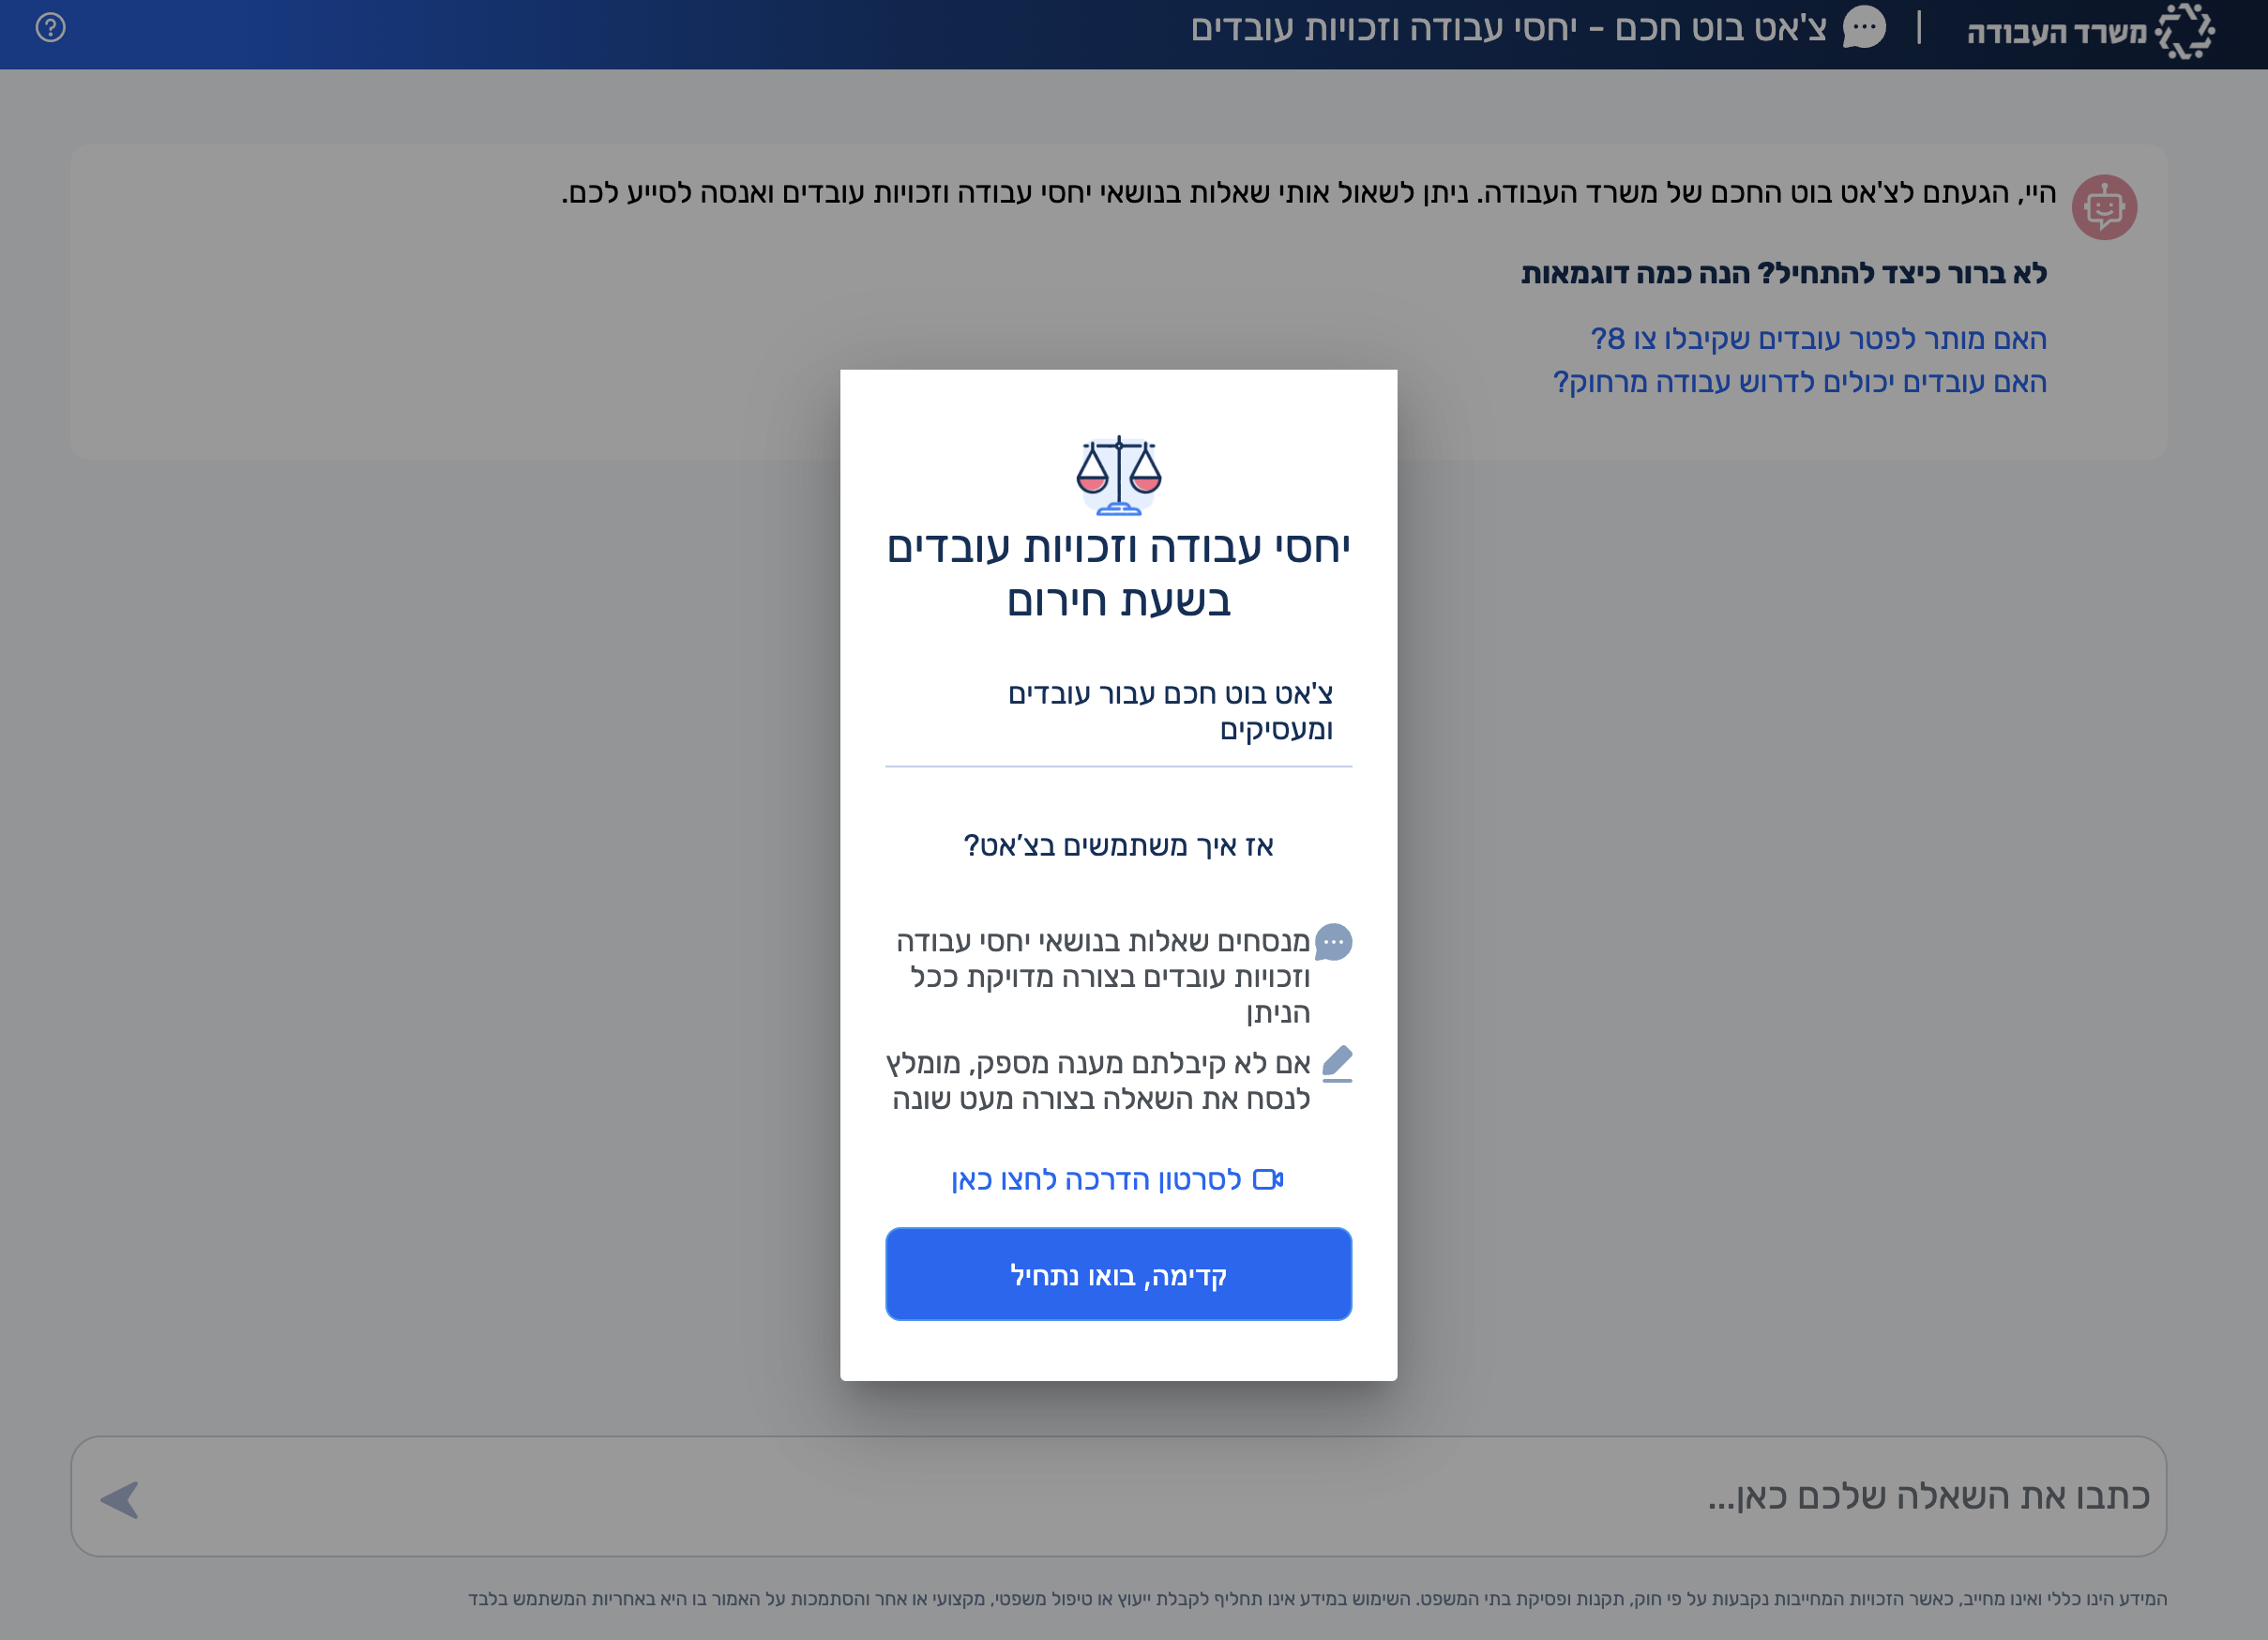 Israel’s Ministry of Labor homepage